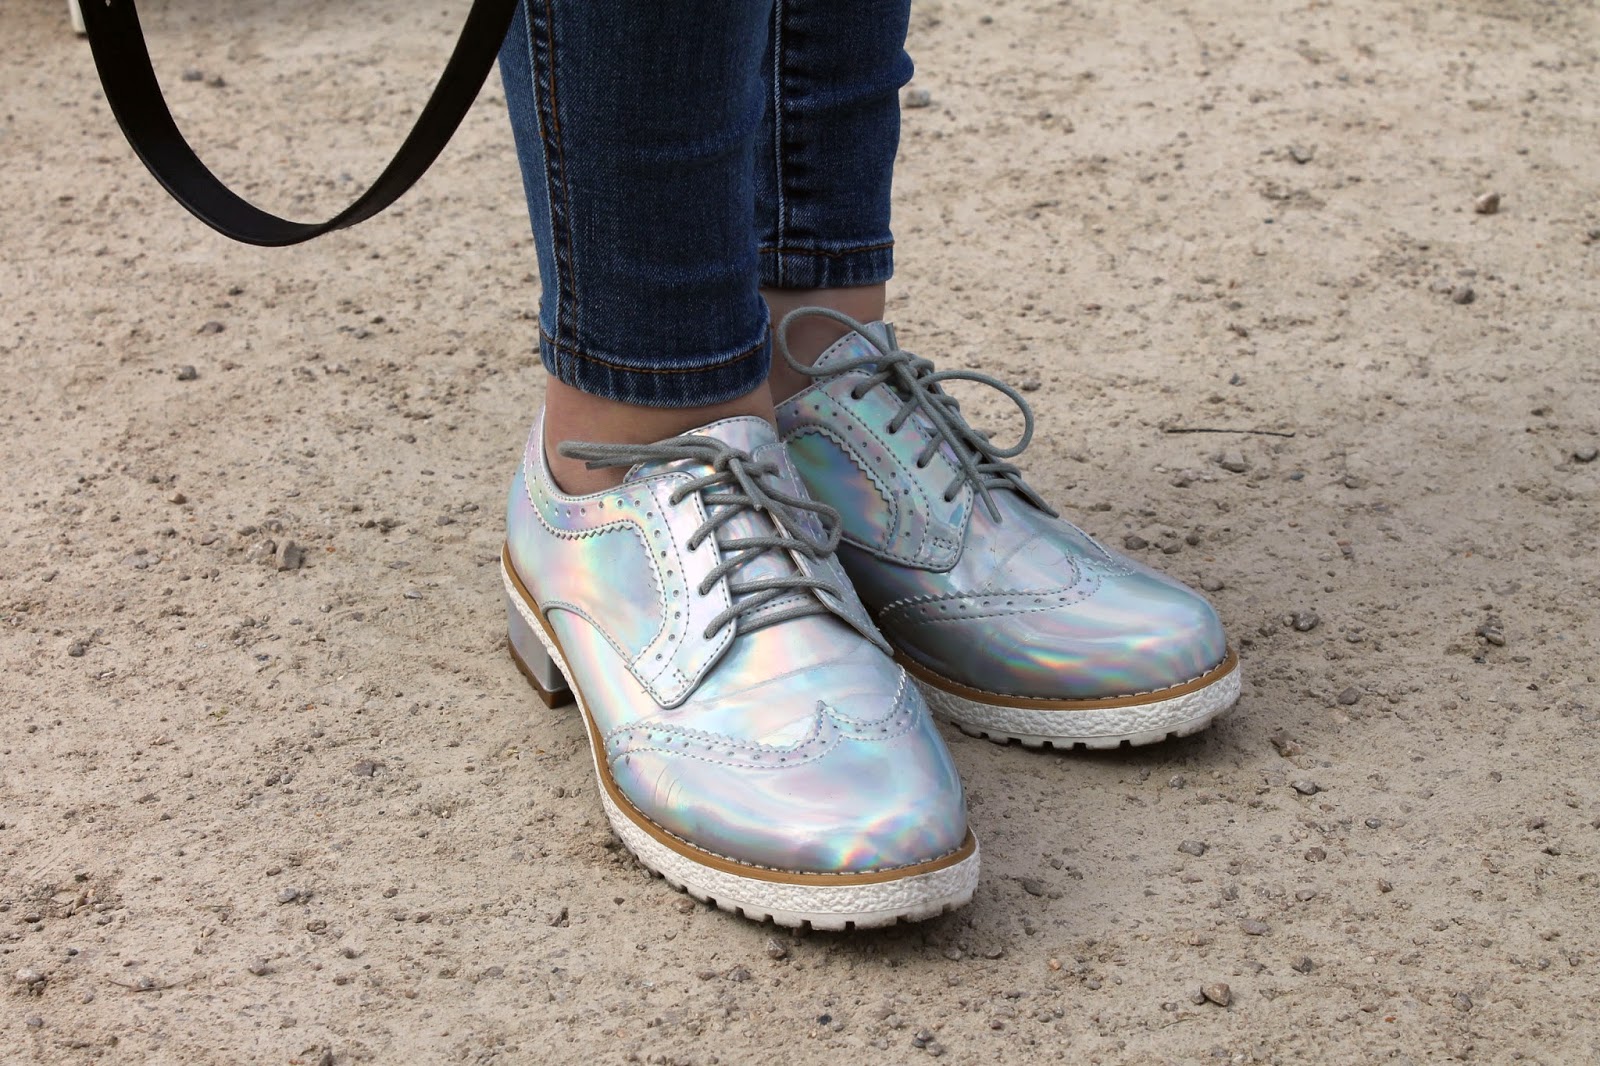 north west fashion festival streetstyle, holographic silver brogues